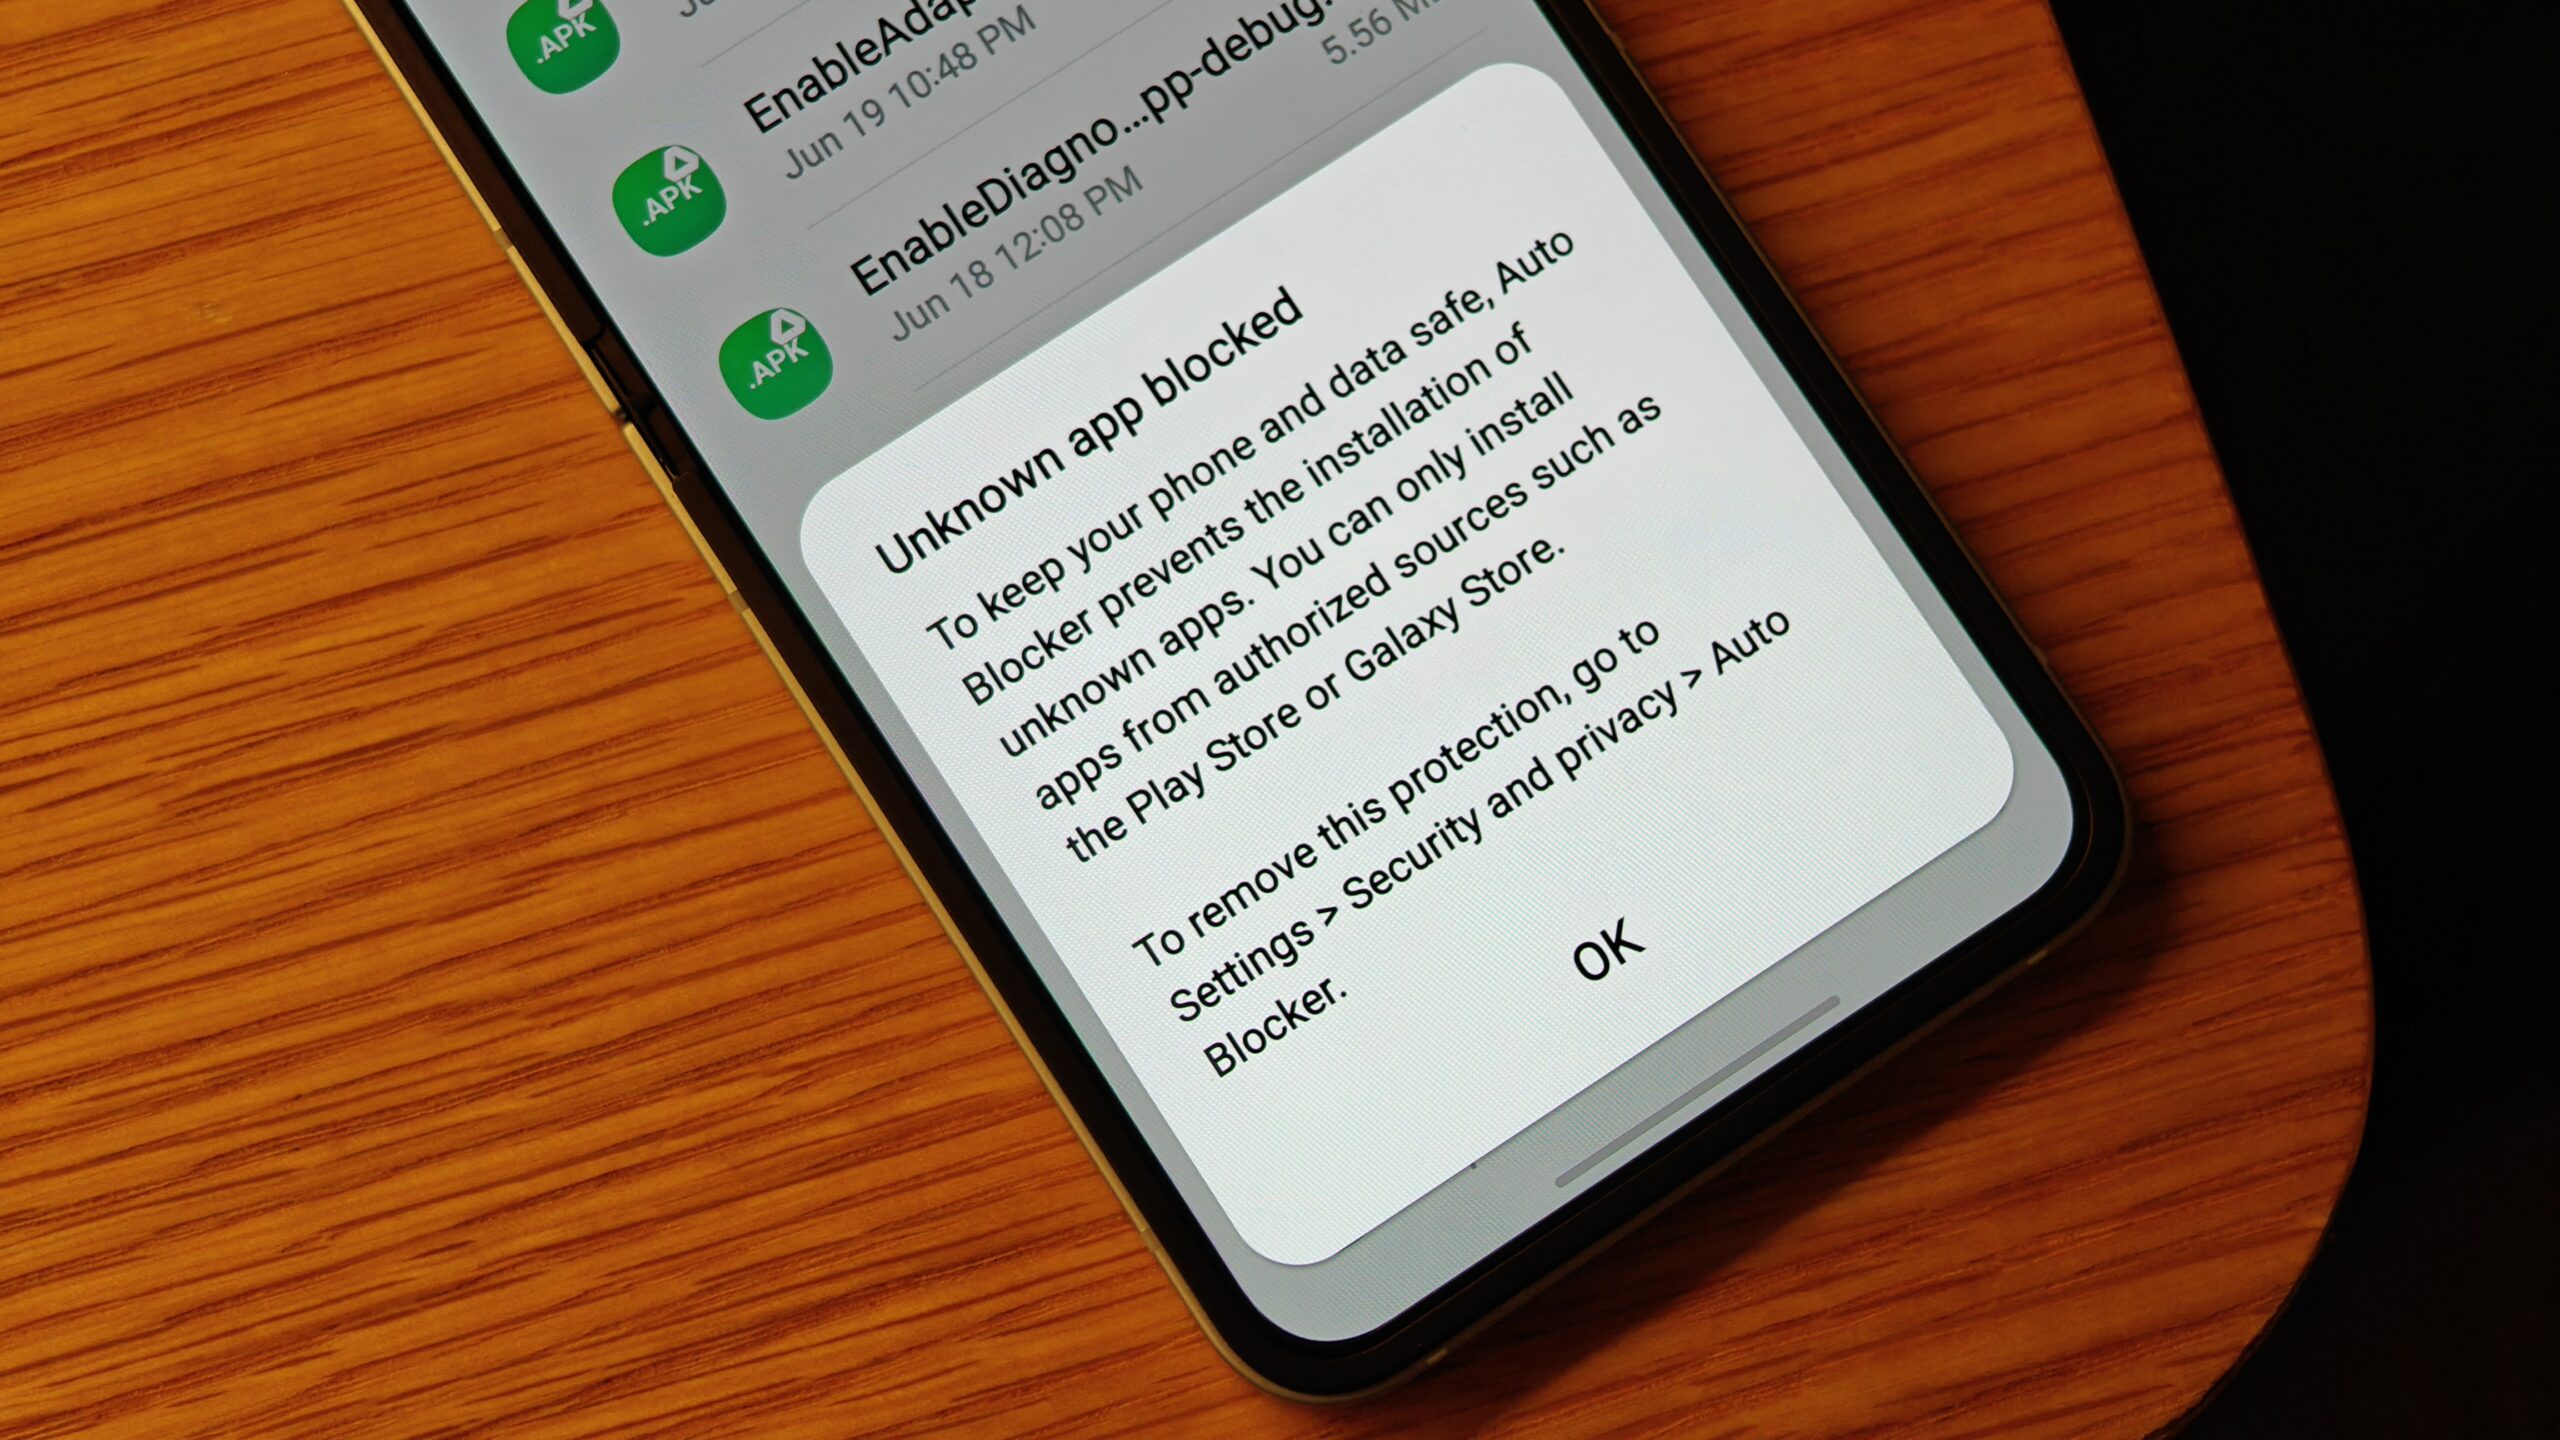 PSA: New Samsung phones block sideloading by default. Here’s how to re-enable it